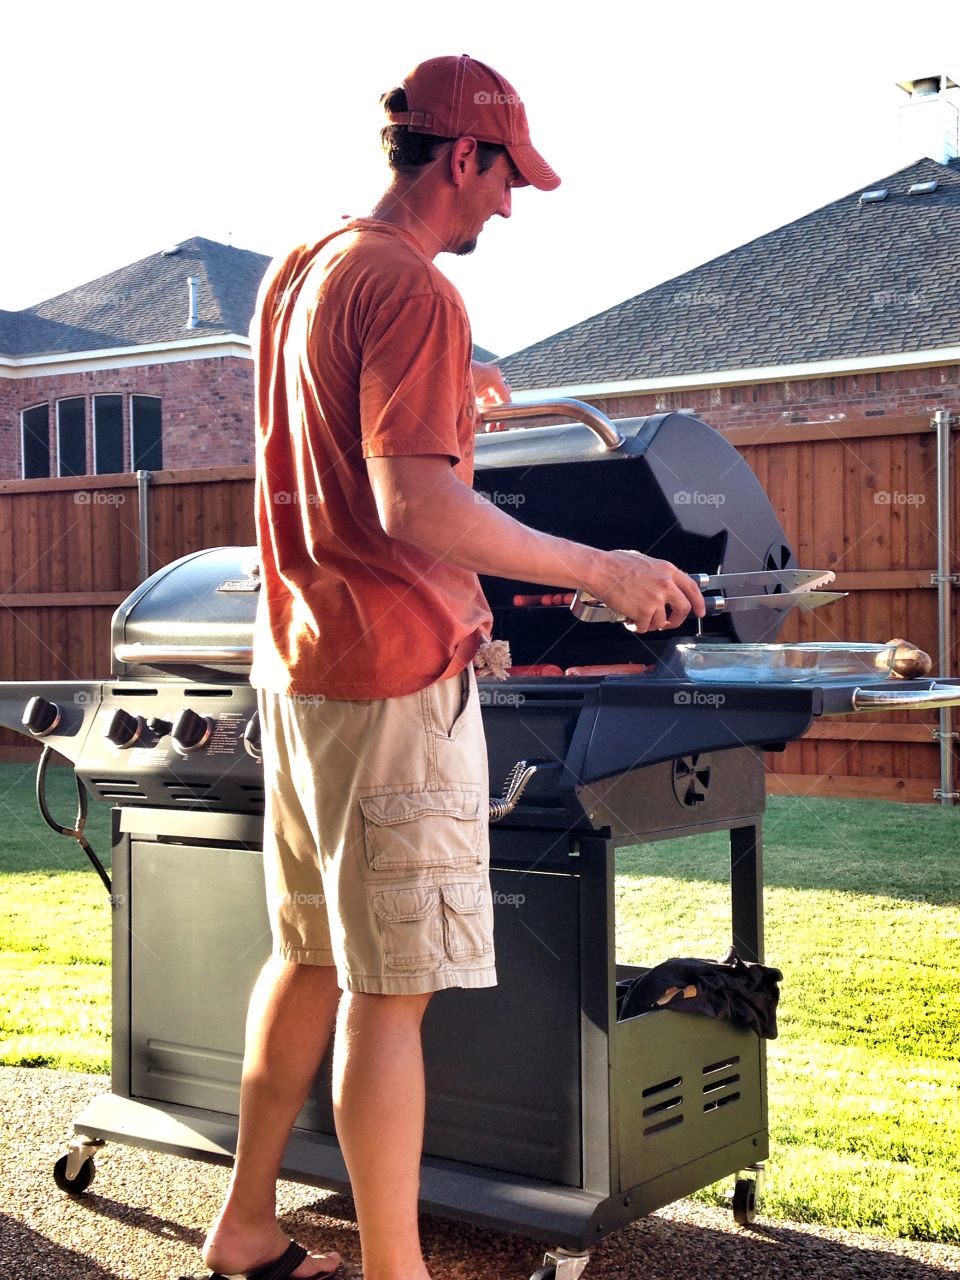 Man preparing food on barbeque grill